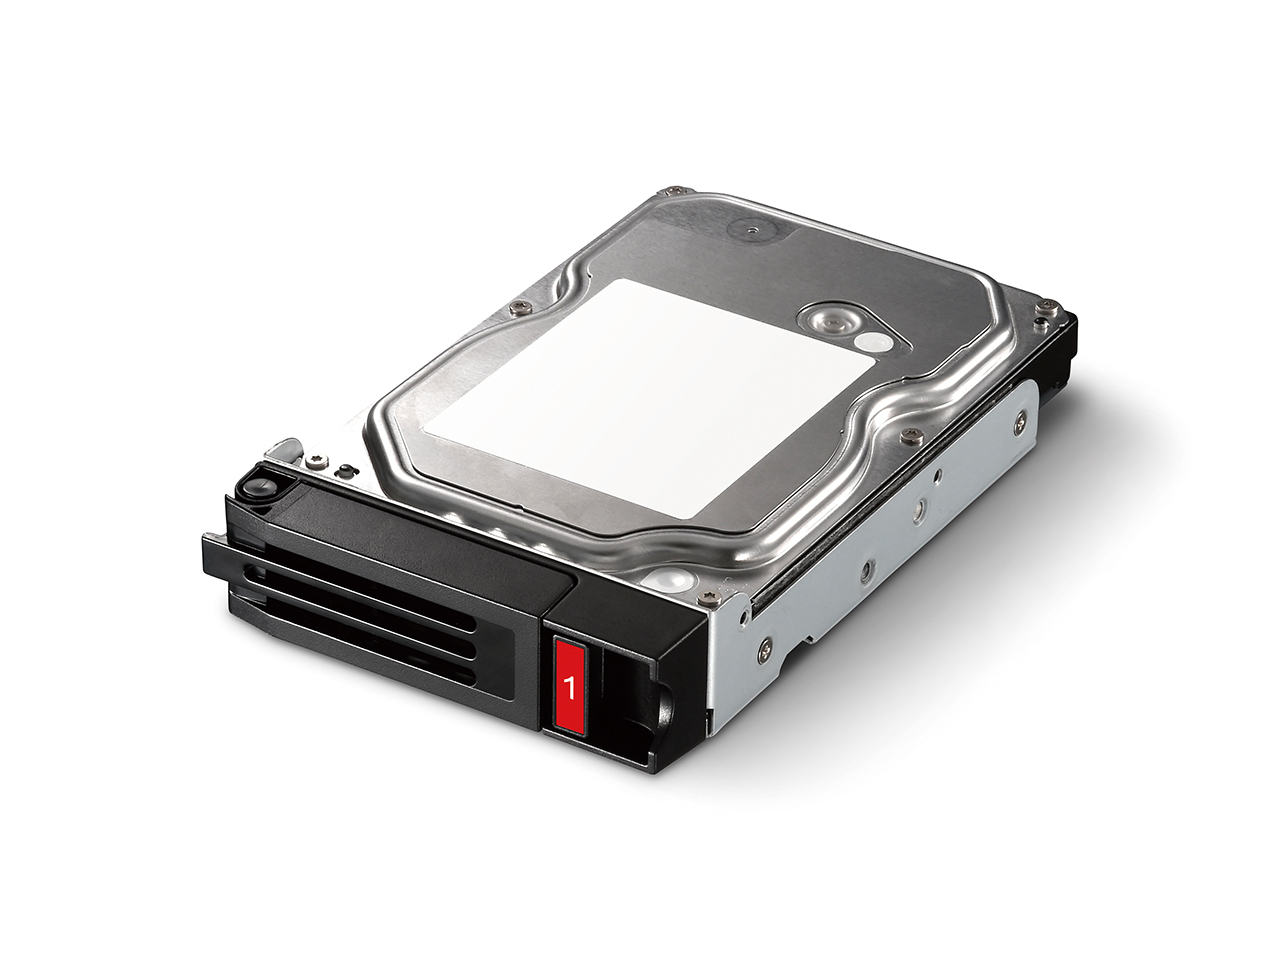 Replacement Hard Drives for TeraStation™ 5010, 3010, 3020, WS5020, 6400, 5020 Series